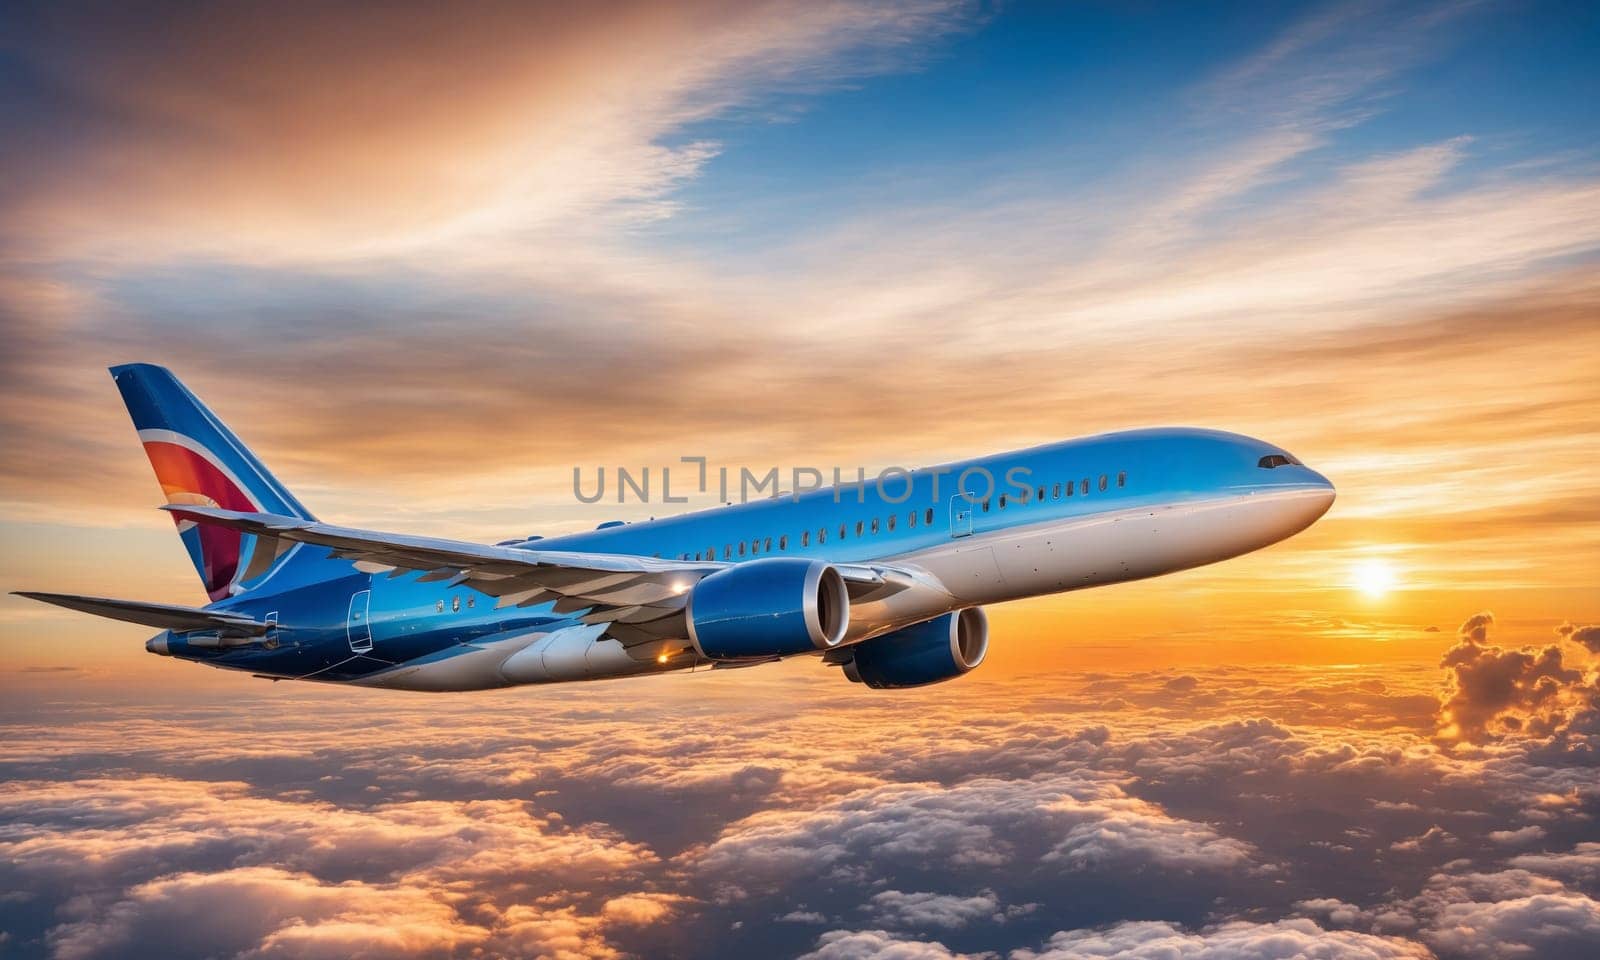 A stunning image capturing an airplane soaring above the clouds during a breathtaking sunset. The golden hues of the setting sun illuminate the aircraft and the sea of clouds below.